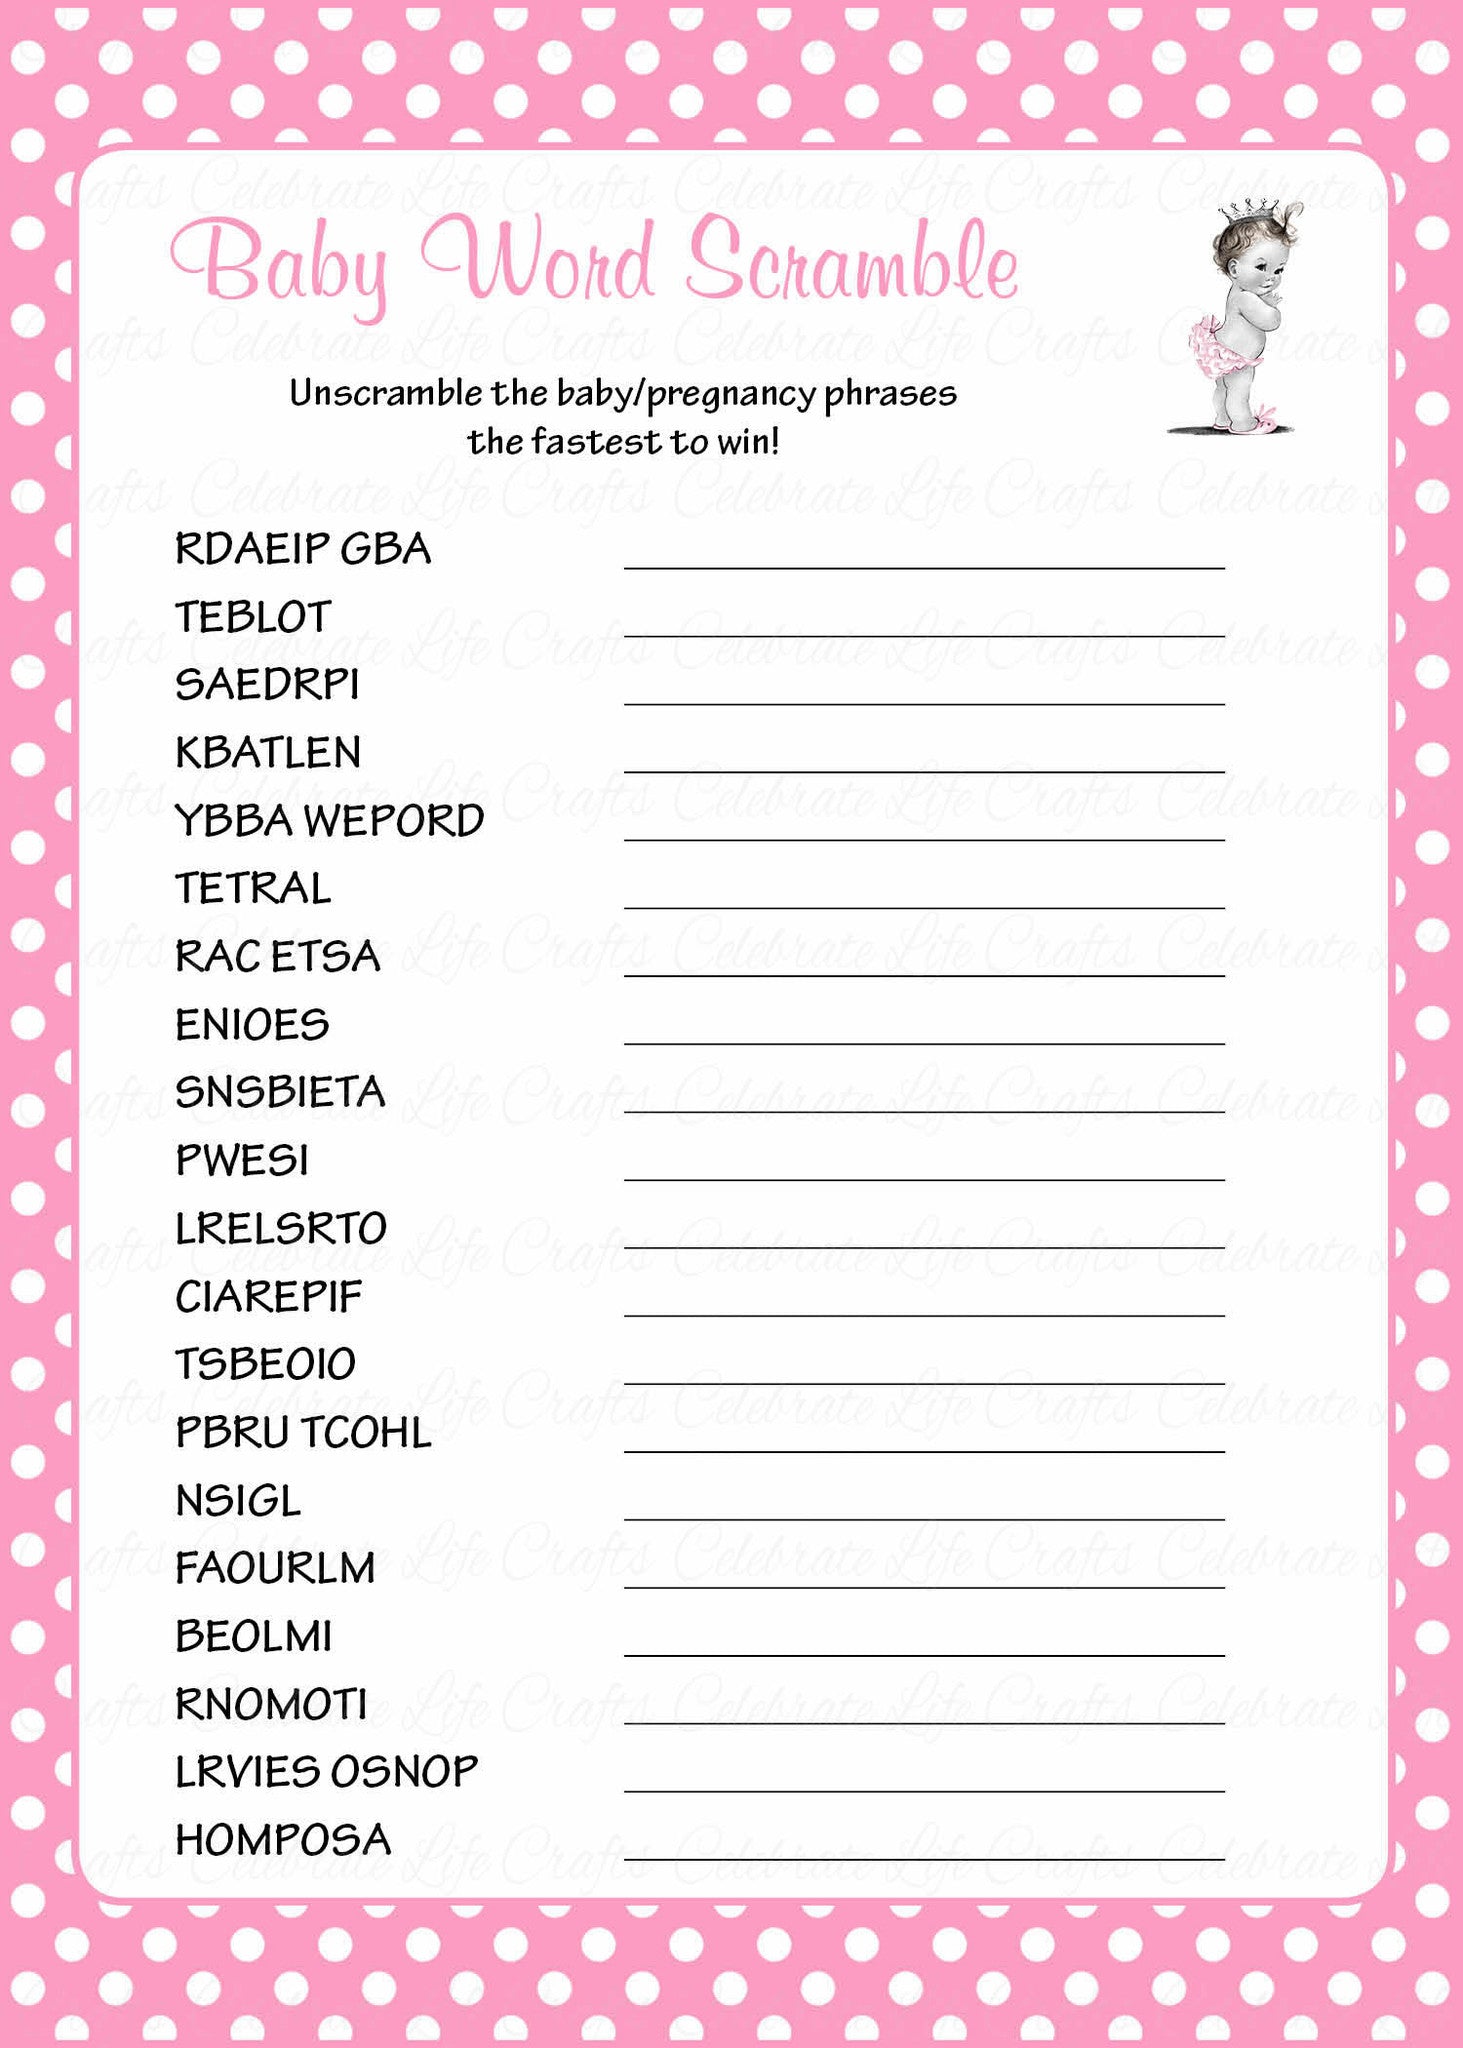 Word Scramble Baby Shower Game - Princess Baby Shower Theme for Baby